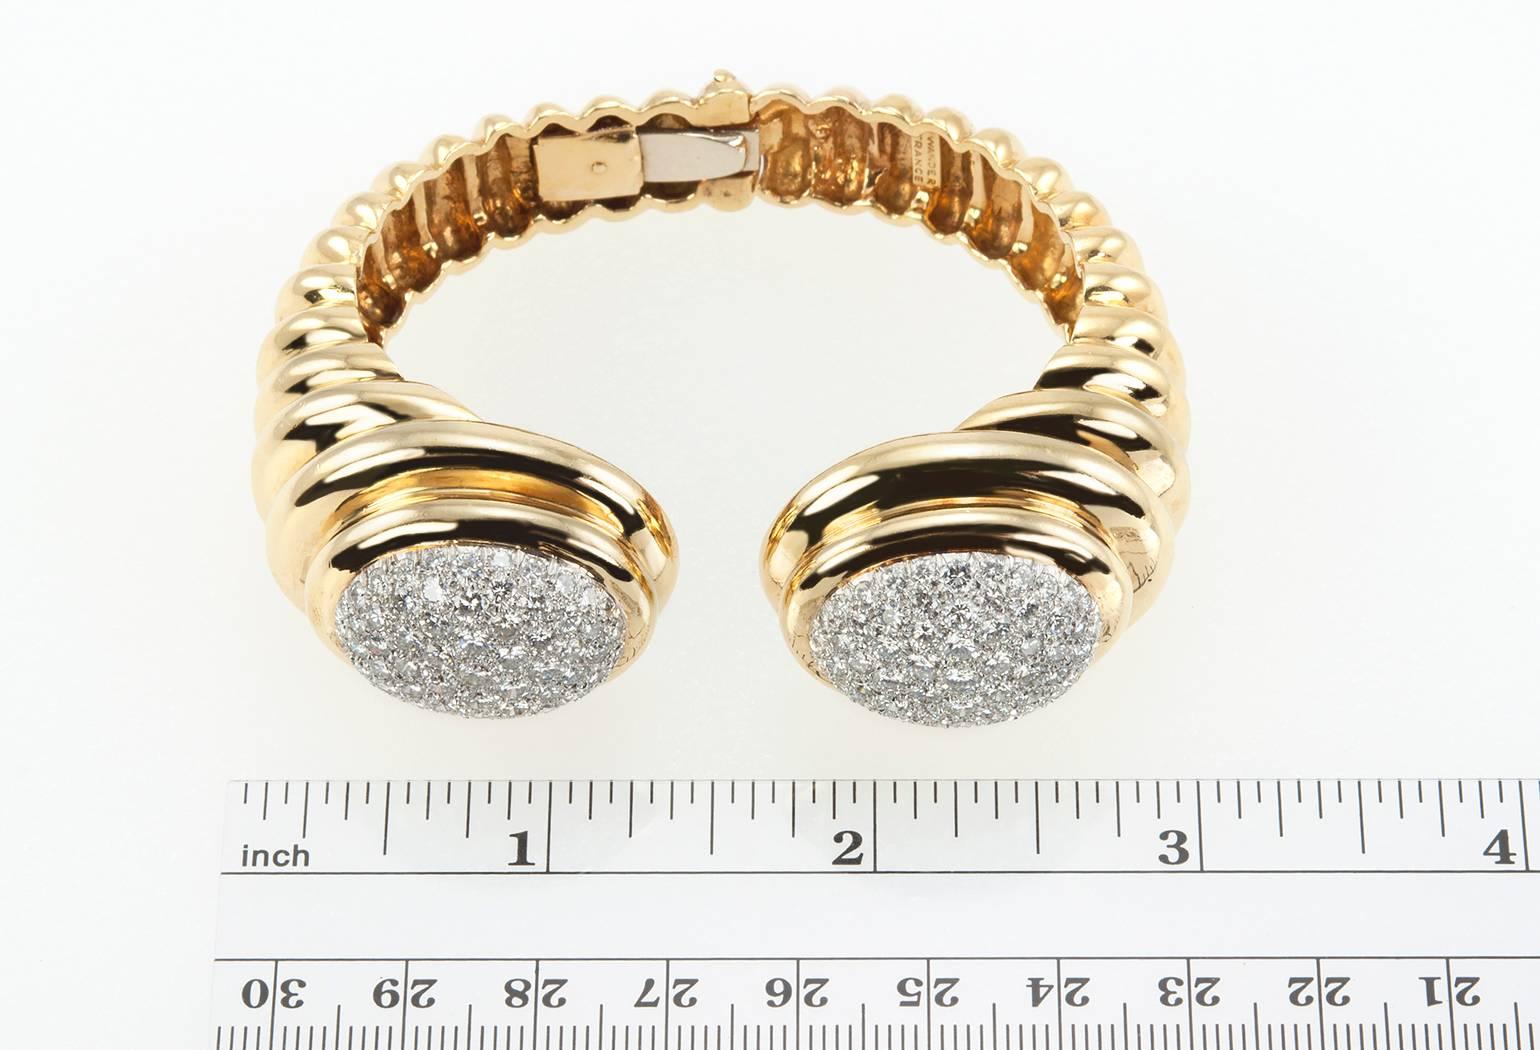 Incredible Wander hinged cuff bracelet in 18 karat yellow gold. The bracelet features 130 round brilliant cut diamonds, which total approximately 10 carats of diamonds. Circa 1970s. 

The bracelet measures approximately 6.75 inches in the inner